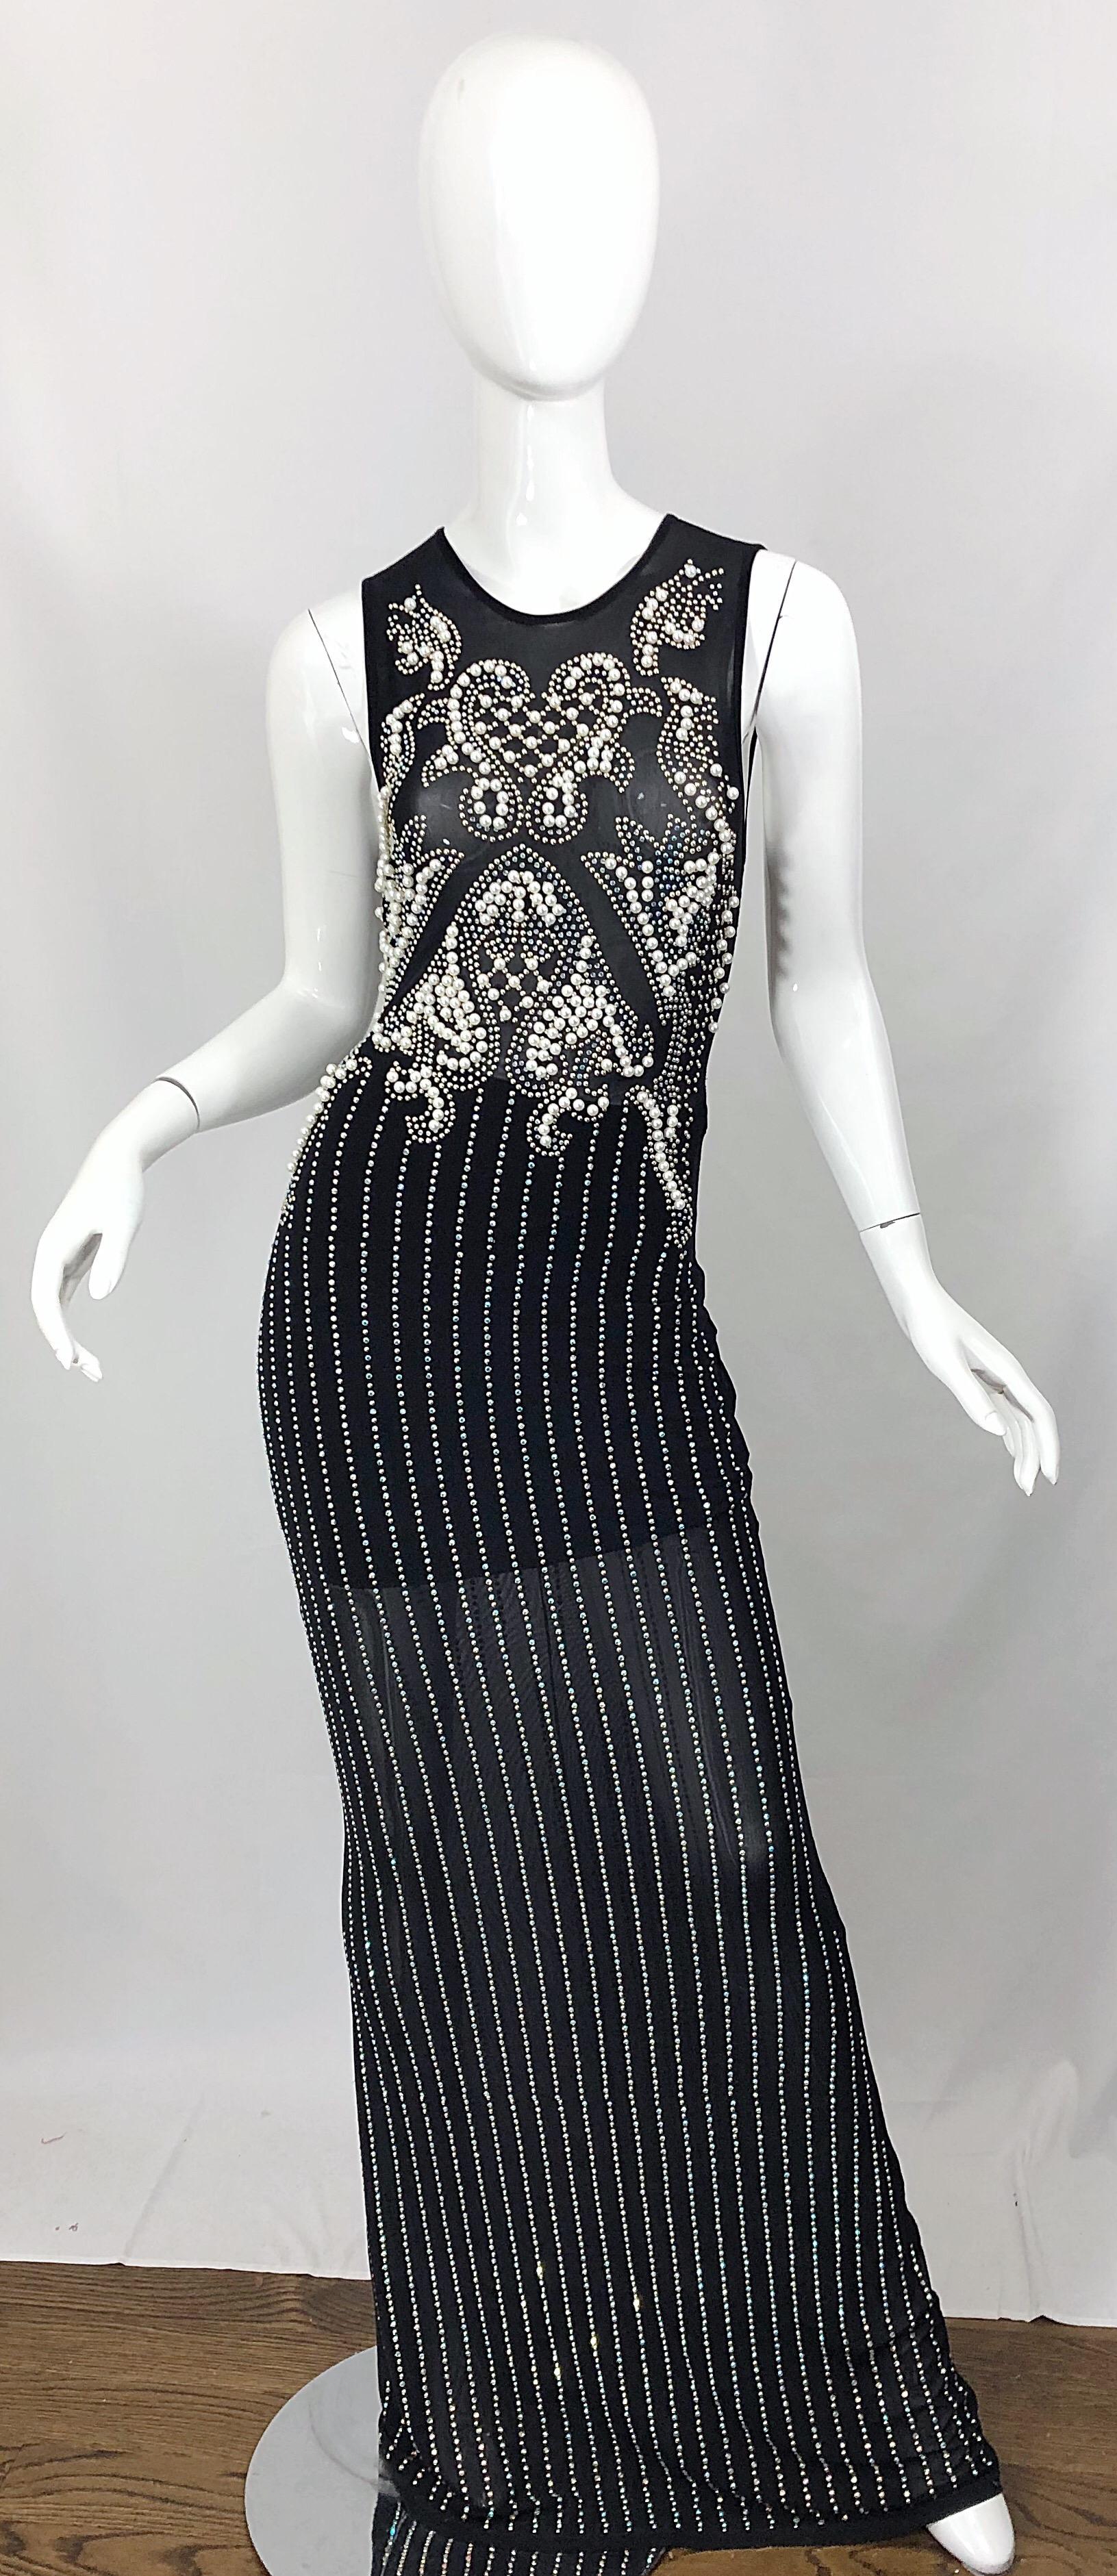 Incredible hand made 1990s black semi-sheer mesh gown! Features thousands of hand-sewn pearls, studs, and rhinestones ( clear and light blue ) throughout. Meticulously placed stones cover the semi-sheer bust. Built-in 'mini skirt' lining covers the